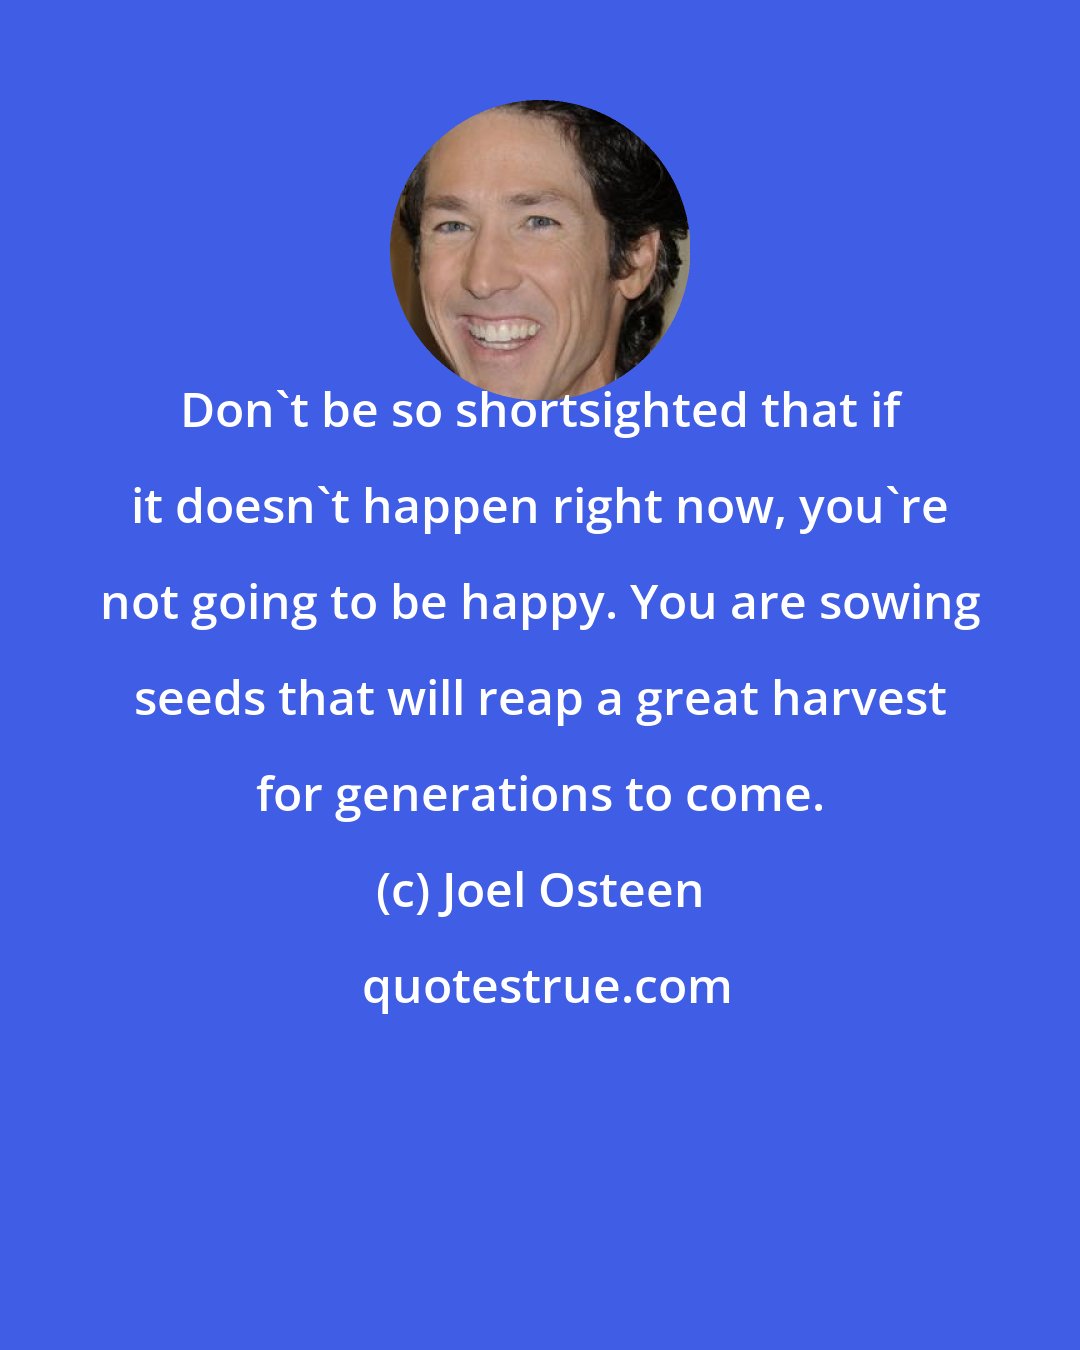 Joel Osteen: Don't be so shortsighted that if it doesn't happen right now, you're not going to be happy. You are sowing seeds that will reap a great harvest for generations to come.